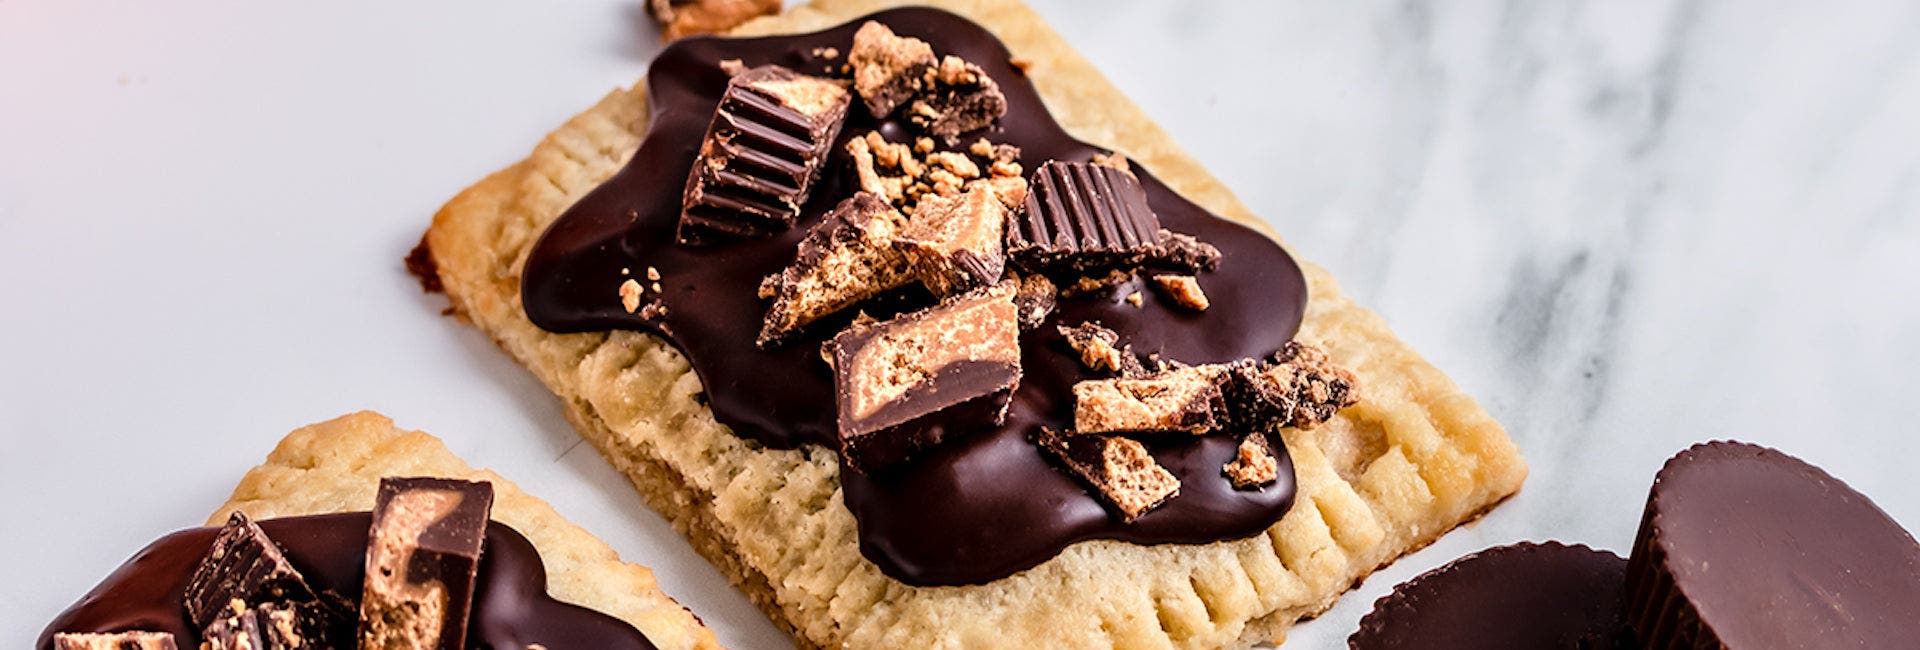 Peanut Butter Cup Toaster Pastries